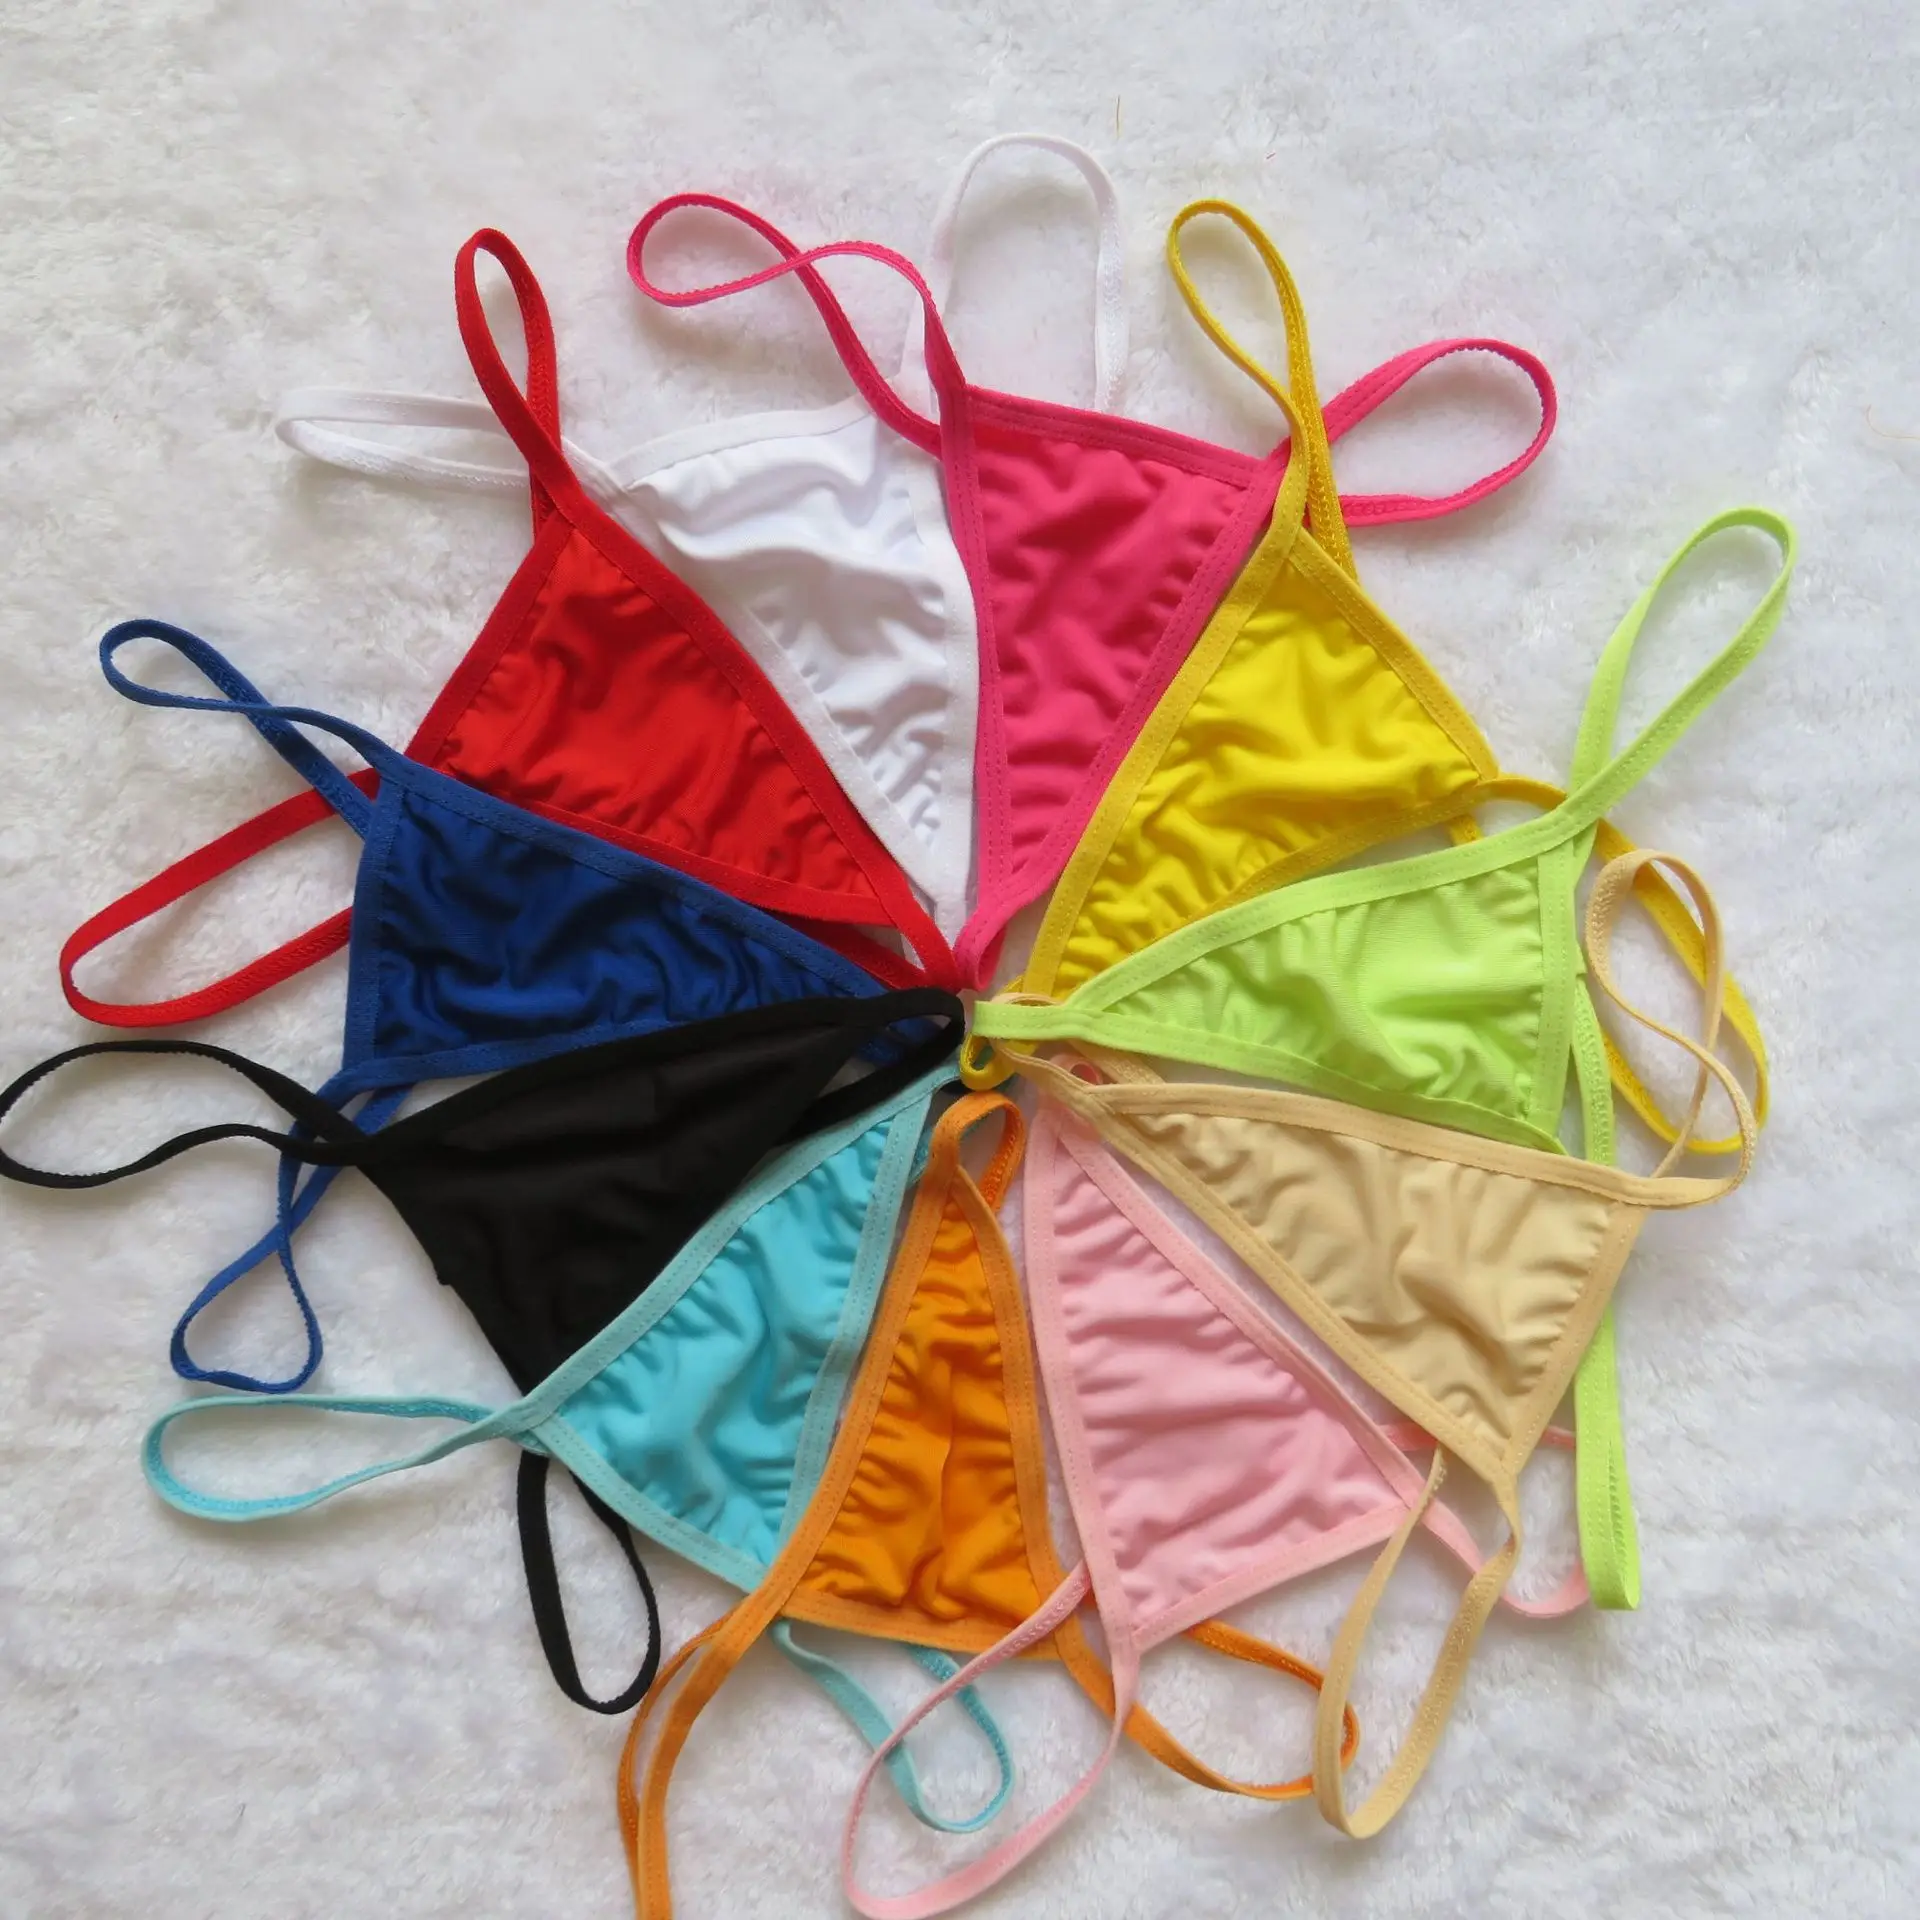 Simply Styled *3 PACK* Women's Lace Thong Silky Underwear Panties S M NWT FAST